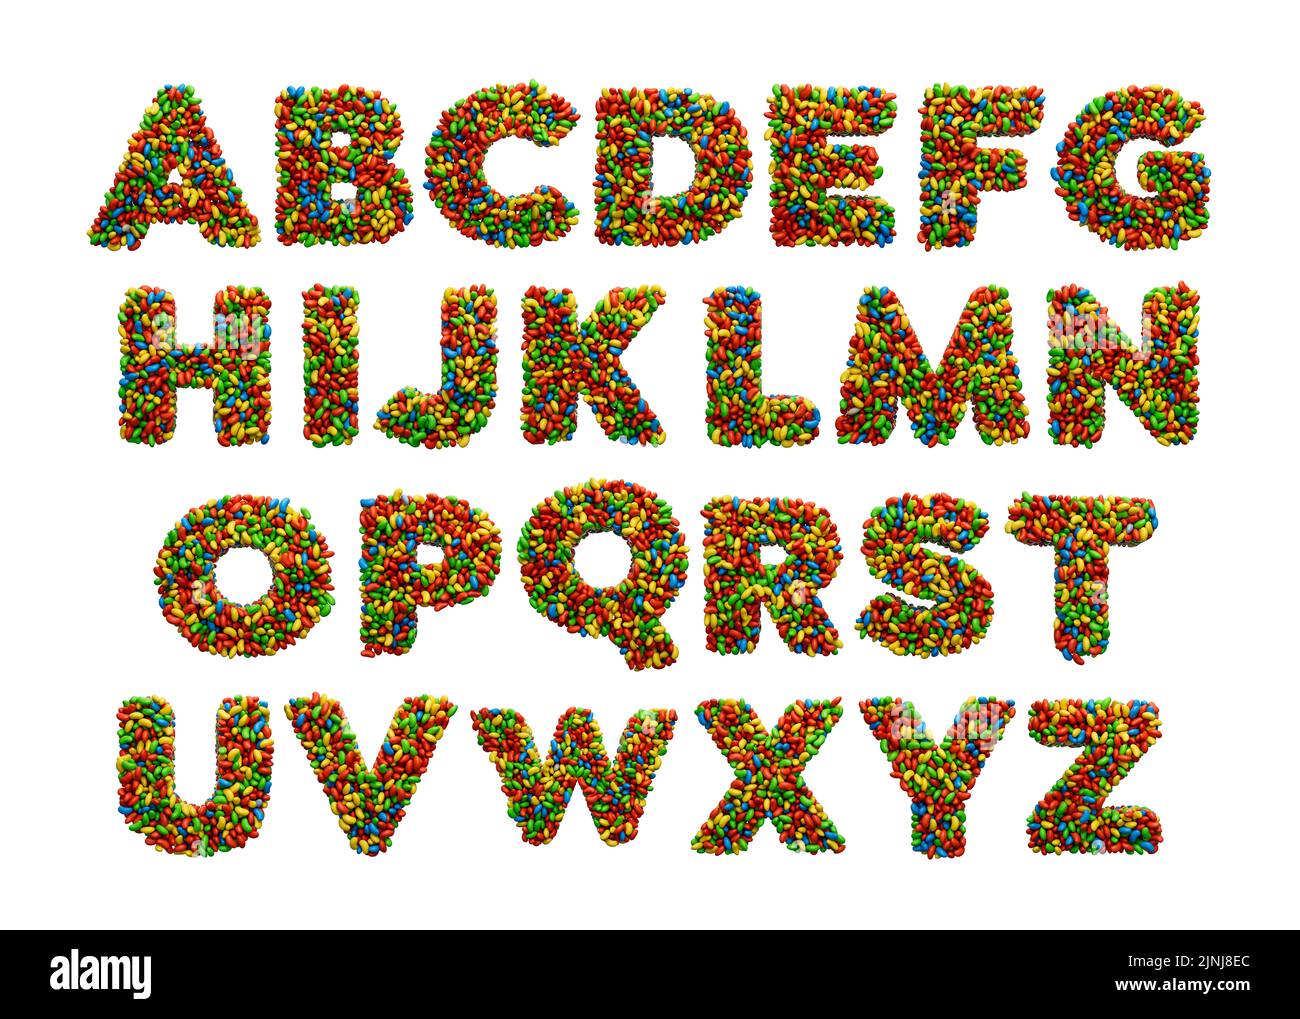 A 3D rendering of the colorful English alphabet from A to Z on a white background Stock Photo